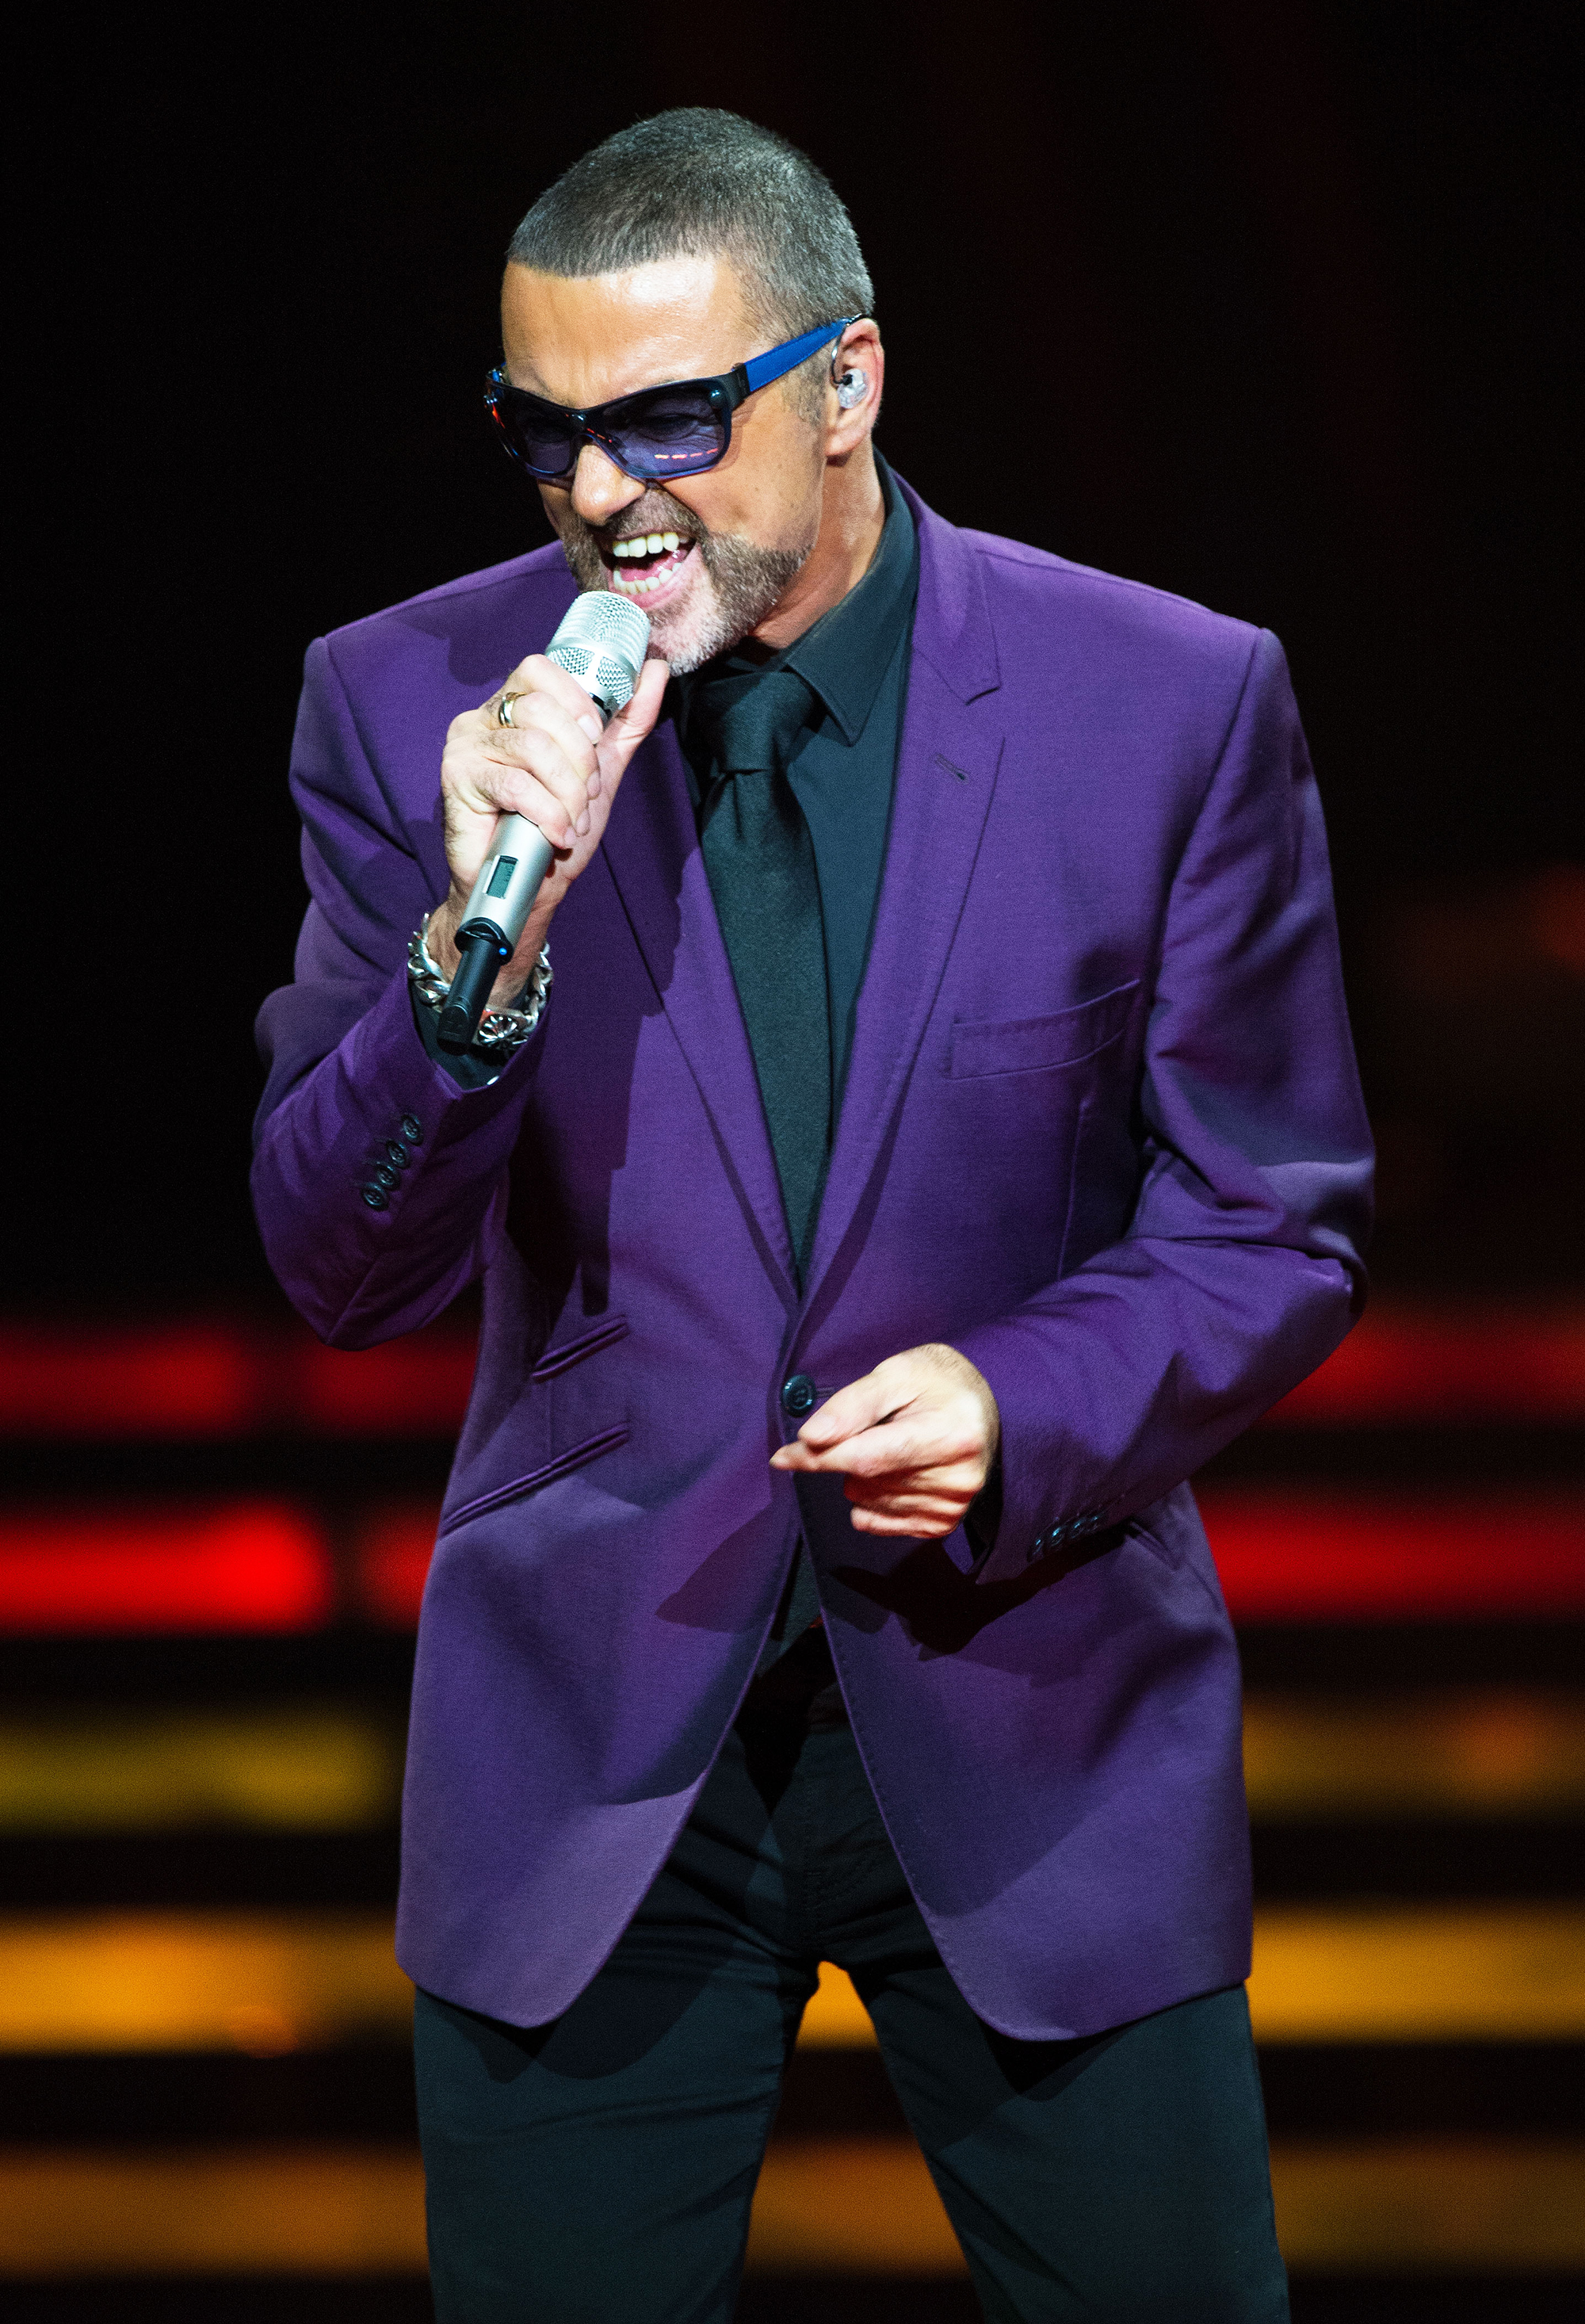 George Michael performs at the Royal Albert Hall in London, on Sept. 29, 2012.